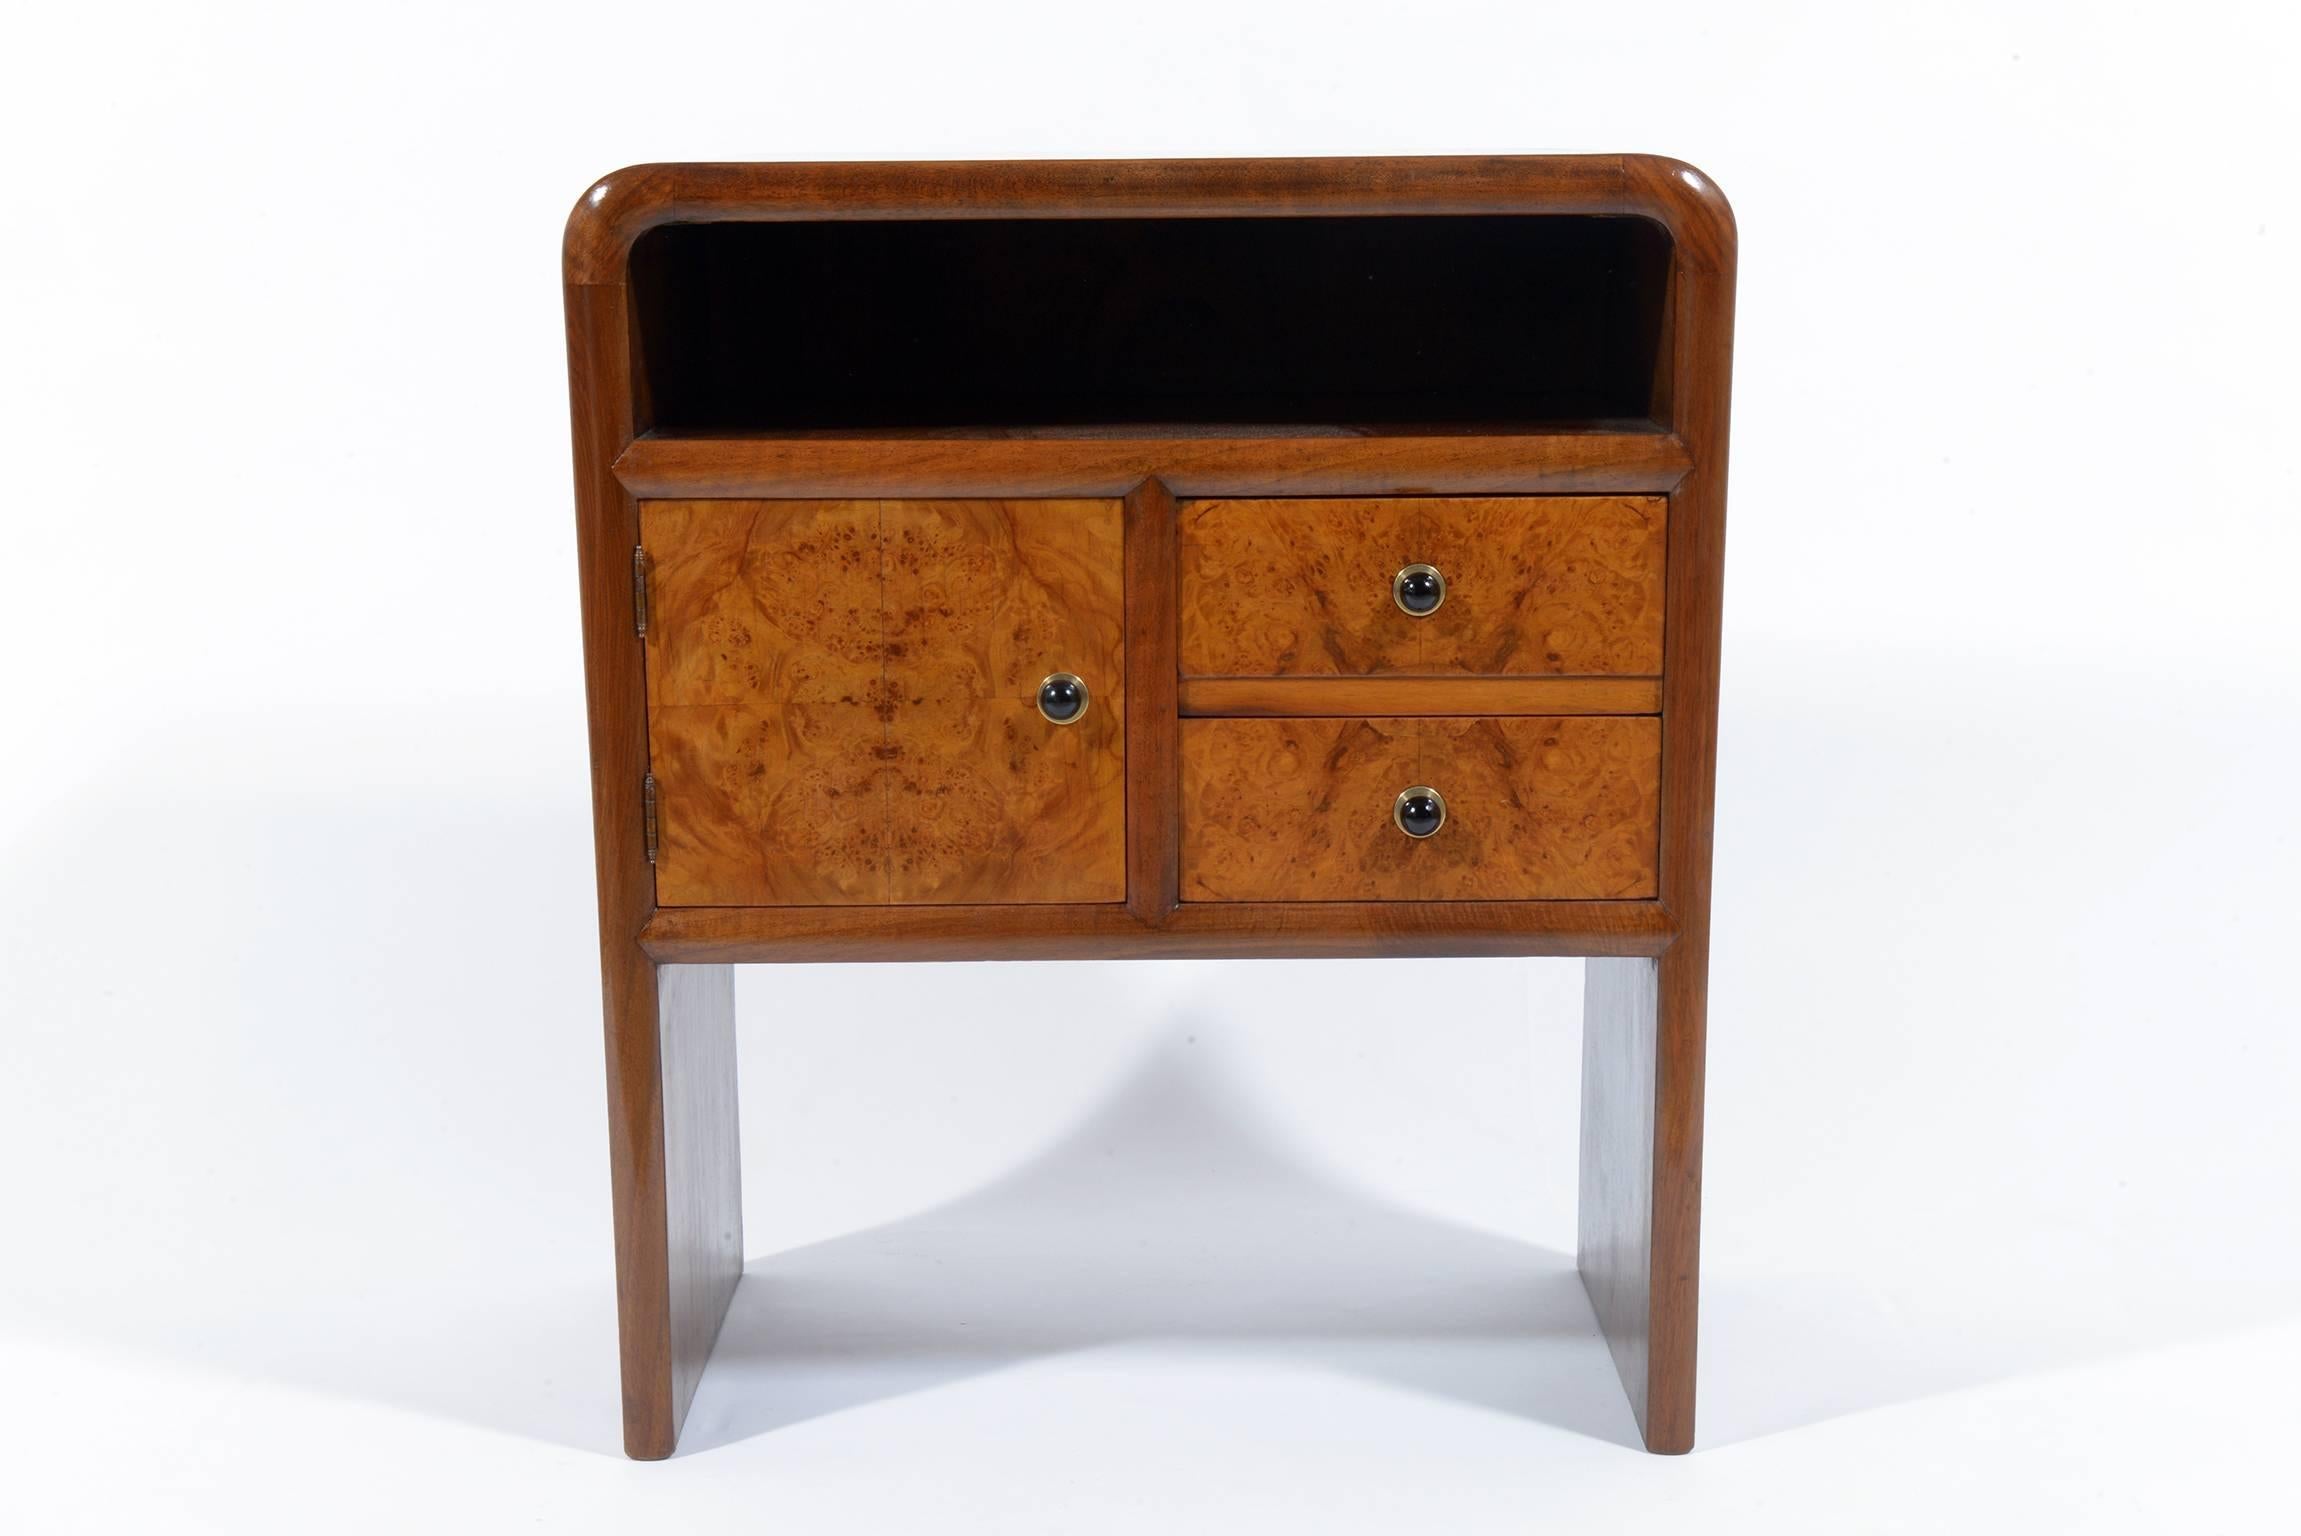 Pair of exotic wood and maples burl nightstand or side table two drawer and one door. Bakelite handles with brass details.
A space under the top to put books or magazine.
Price is for two.
Italia, 1930.
  